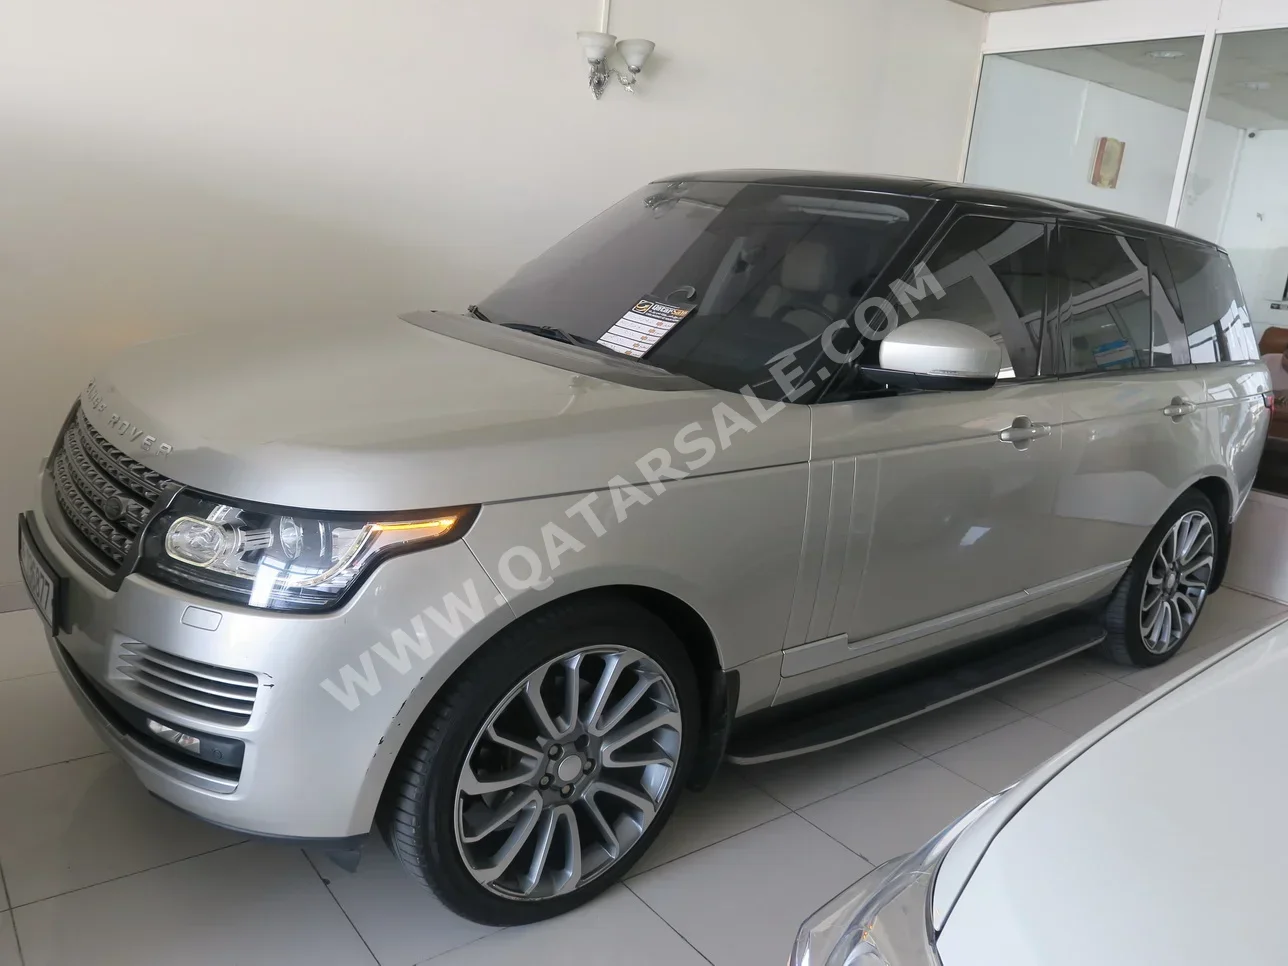 Land Rover  Range Rover  Vogue HSE  2014  Automatic  162,000 Km  8 Cylinder  Four Wheel Drive (4WD)  SUV  Gold